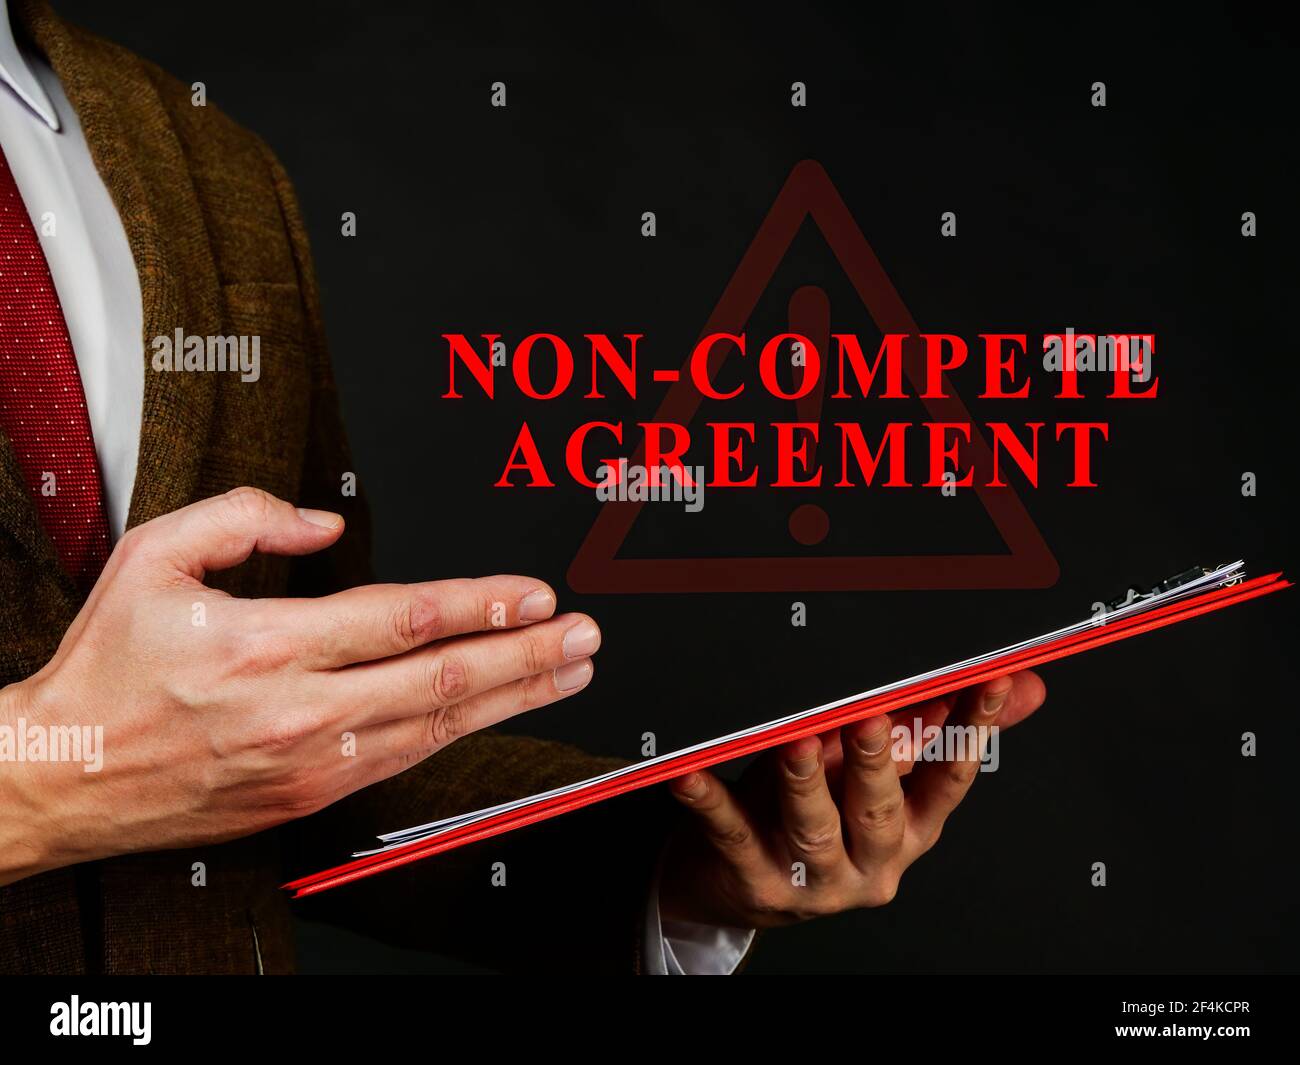 Non compete agreement or clause in the red folder. Stock Photo